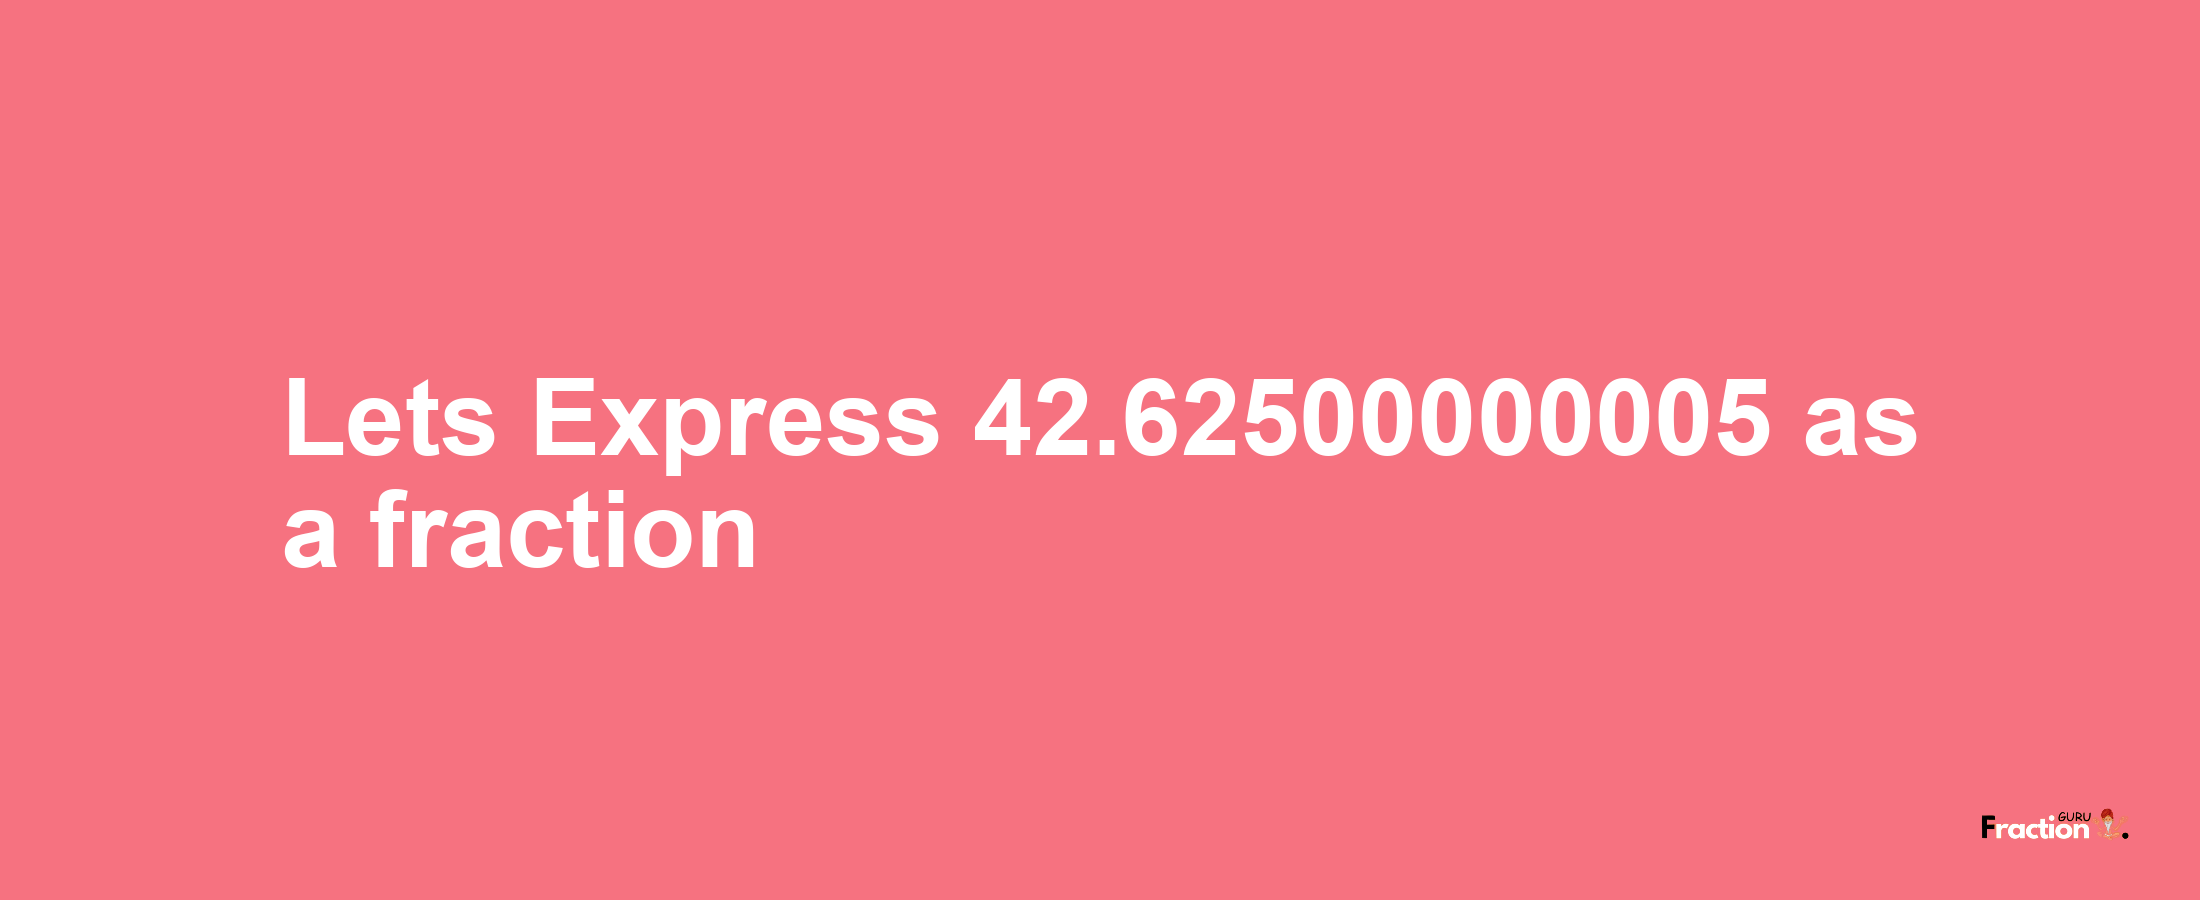 Lets Express 42.62500000005 as afraction